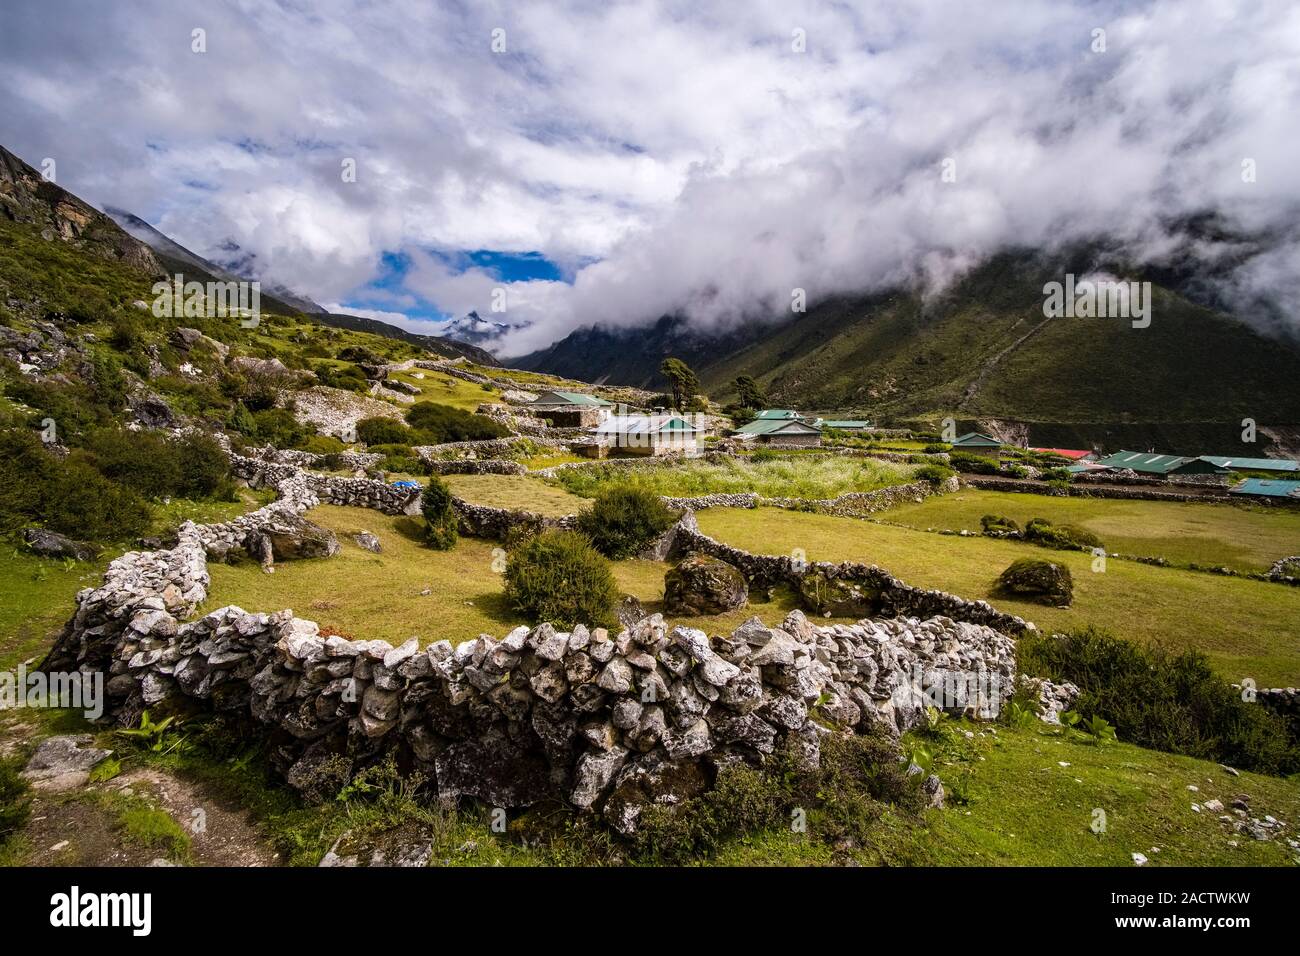 The fields of the small village are surrounded by stone walls, mountainous landscape covered in monsoon clouds in the distance Stock Photo